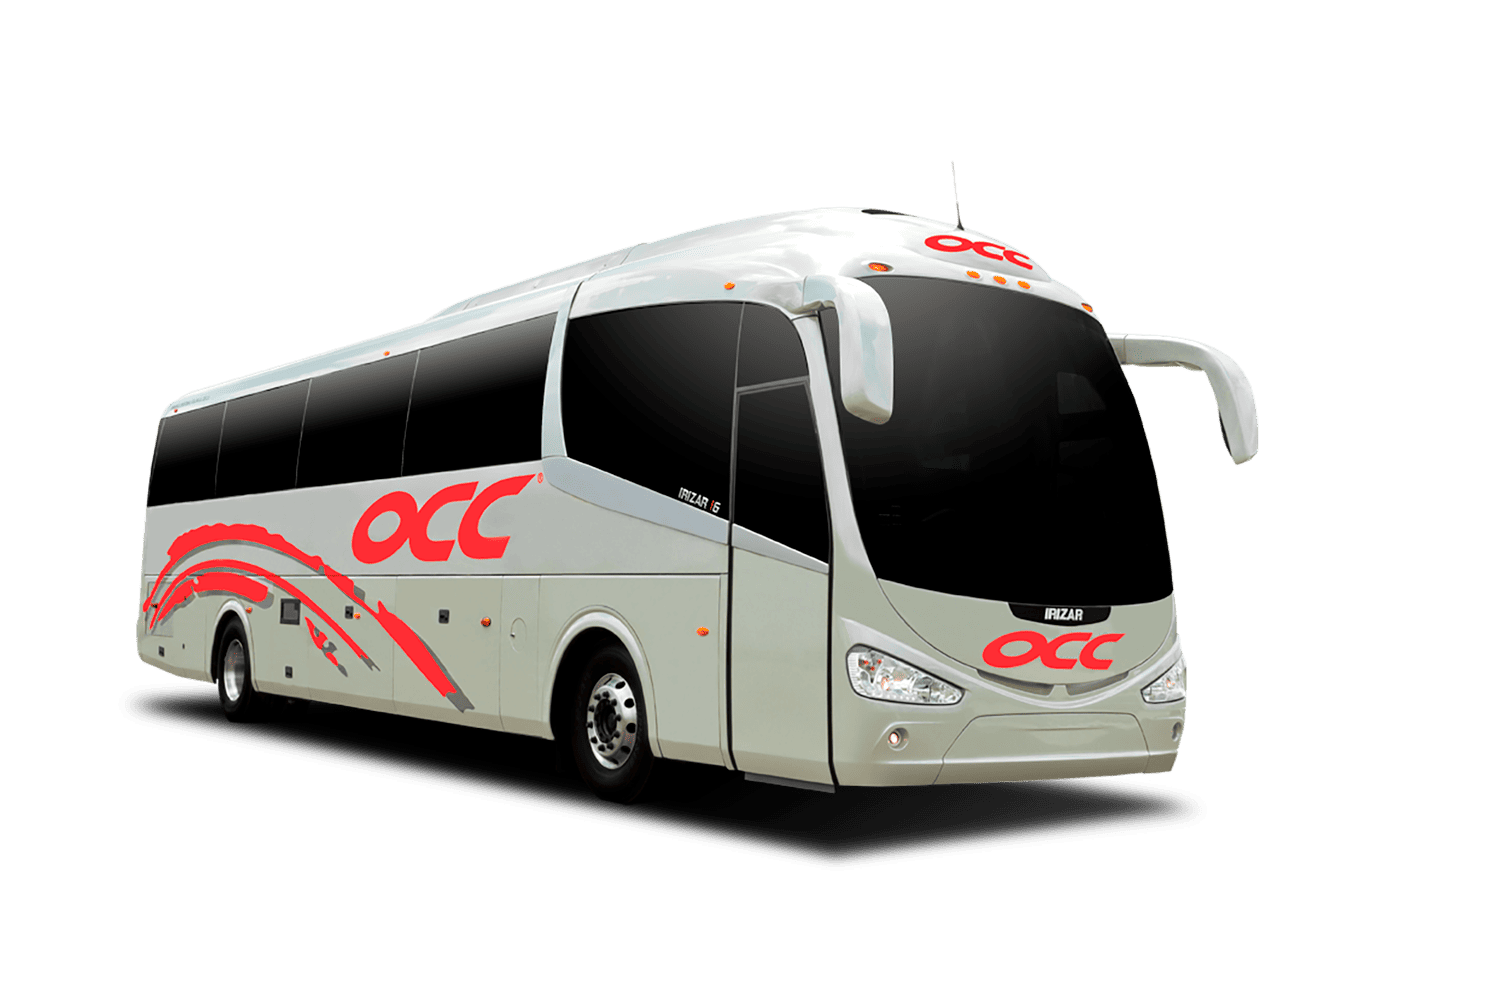 How To Get From Tulum To Palenque By Bus - All Possible Ways, cheapest way from Tulum to Palenque, Tulum to Palenque, ado bus from Tulum to Palenque, occ bus from Tulum to Palenque, AU autobuses unidos from Tulum to Palenque, shared van from Tulum to Palenque, Colectivo from Tulum to Palenque, Uber from Tulum to Palenque, taxi from Tulum to Palenque